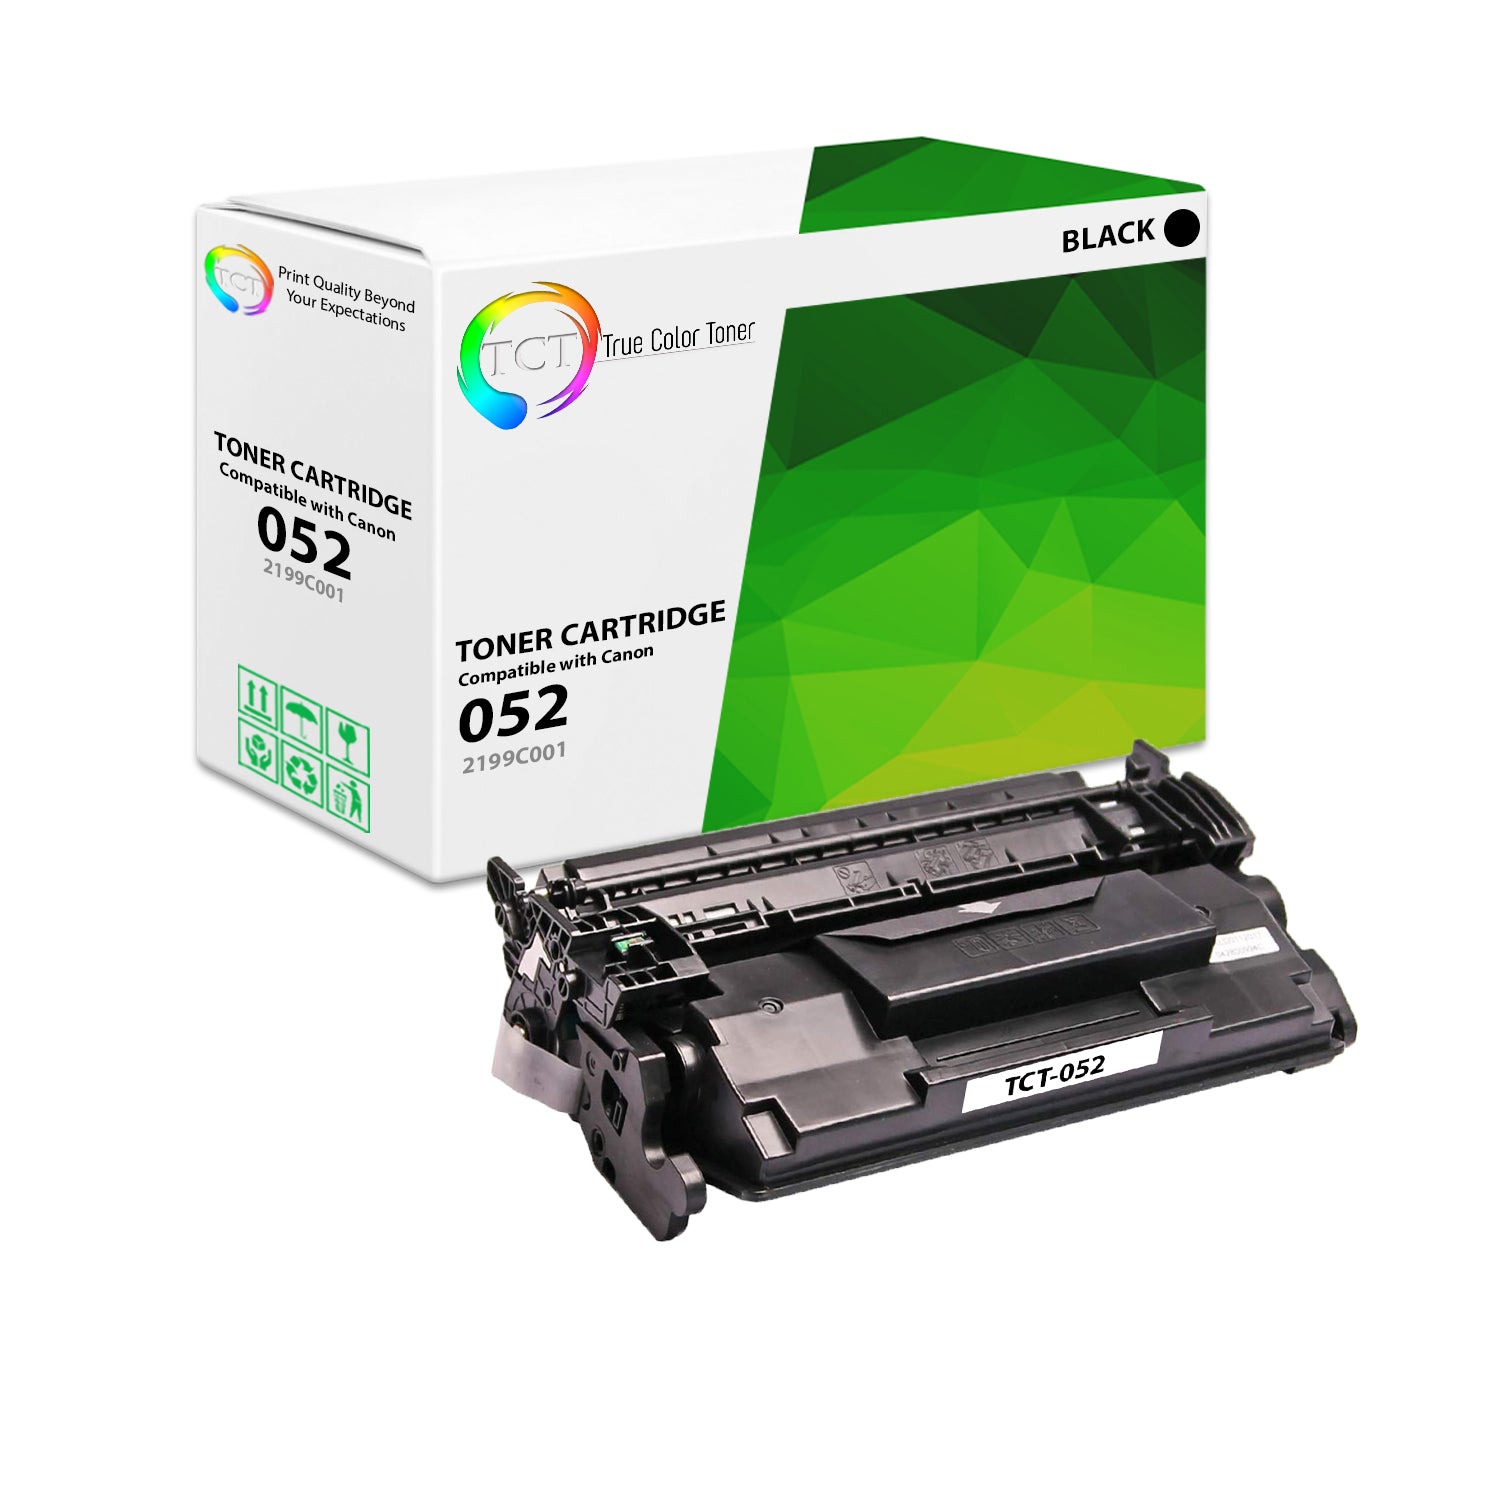 TCT Compatible Toner Cartridge Replacement for the Canon 052 Series - 1 Pack Black